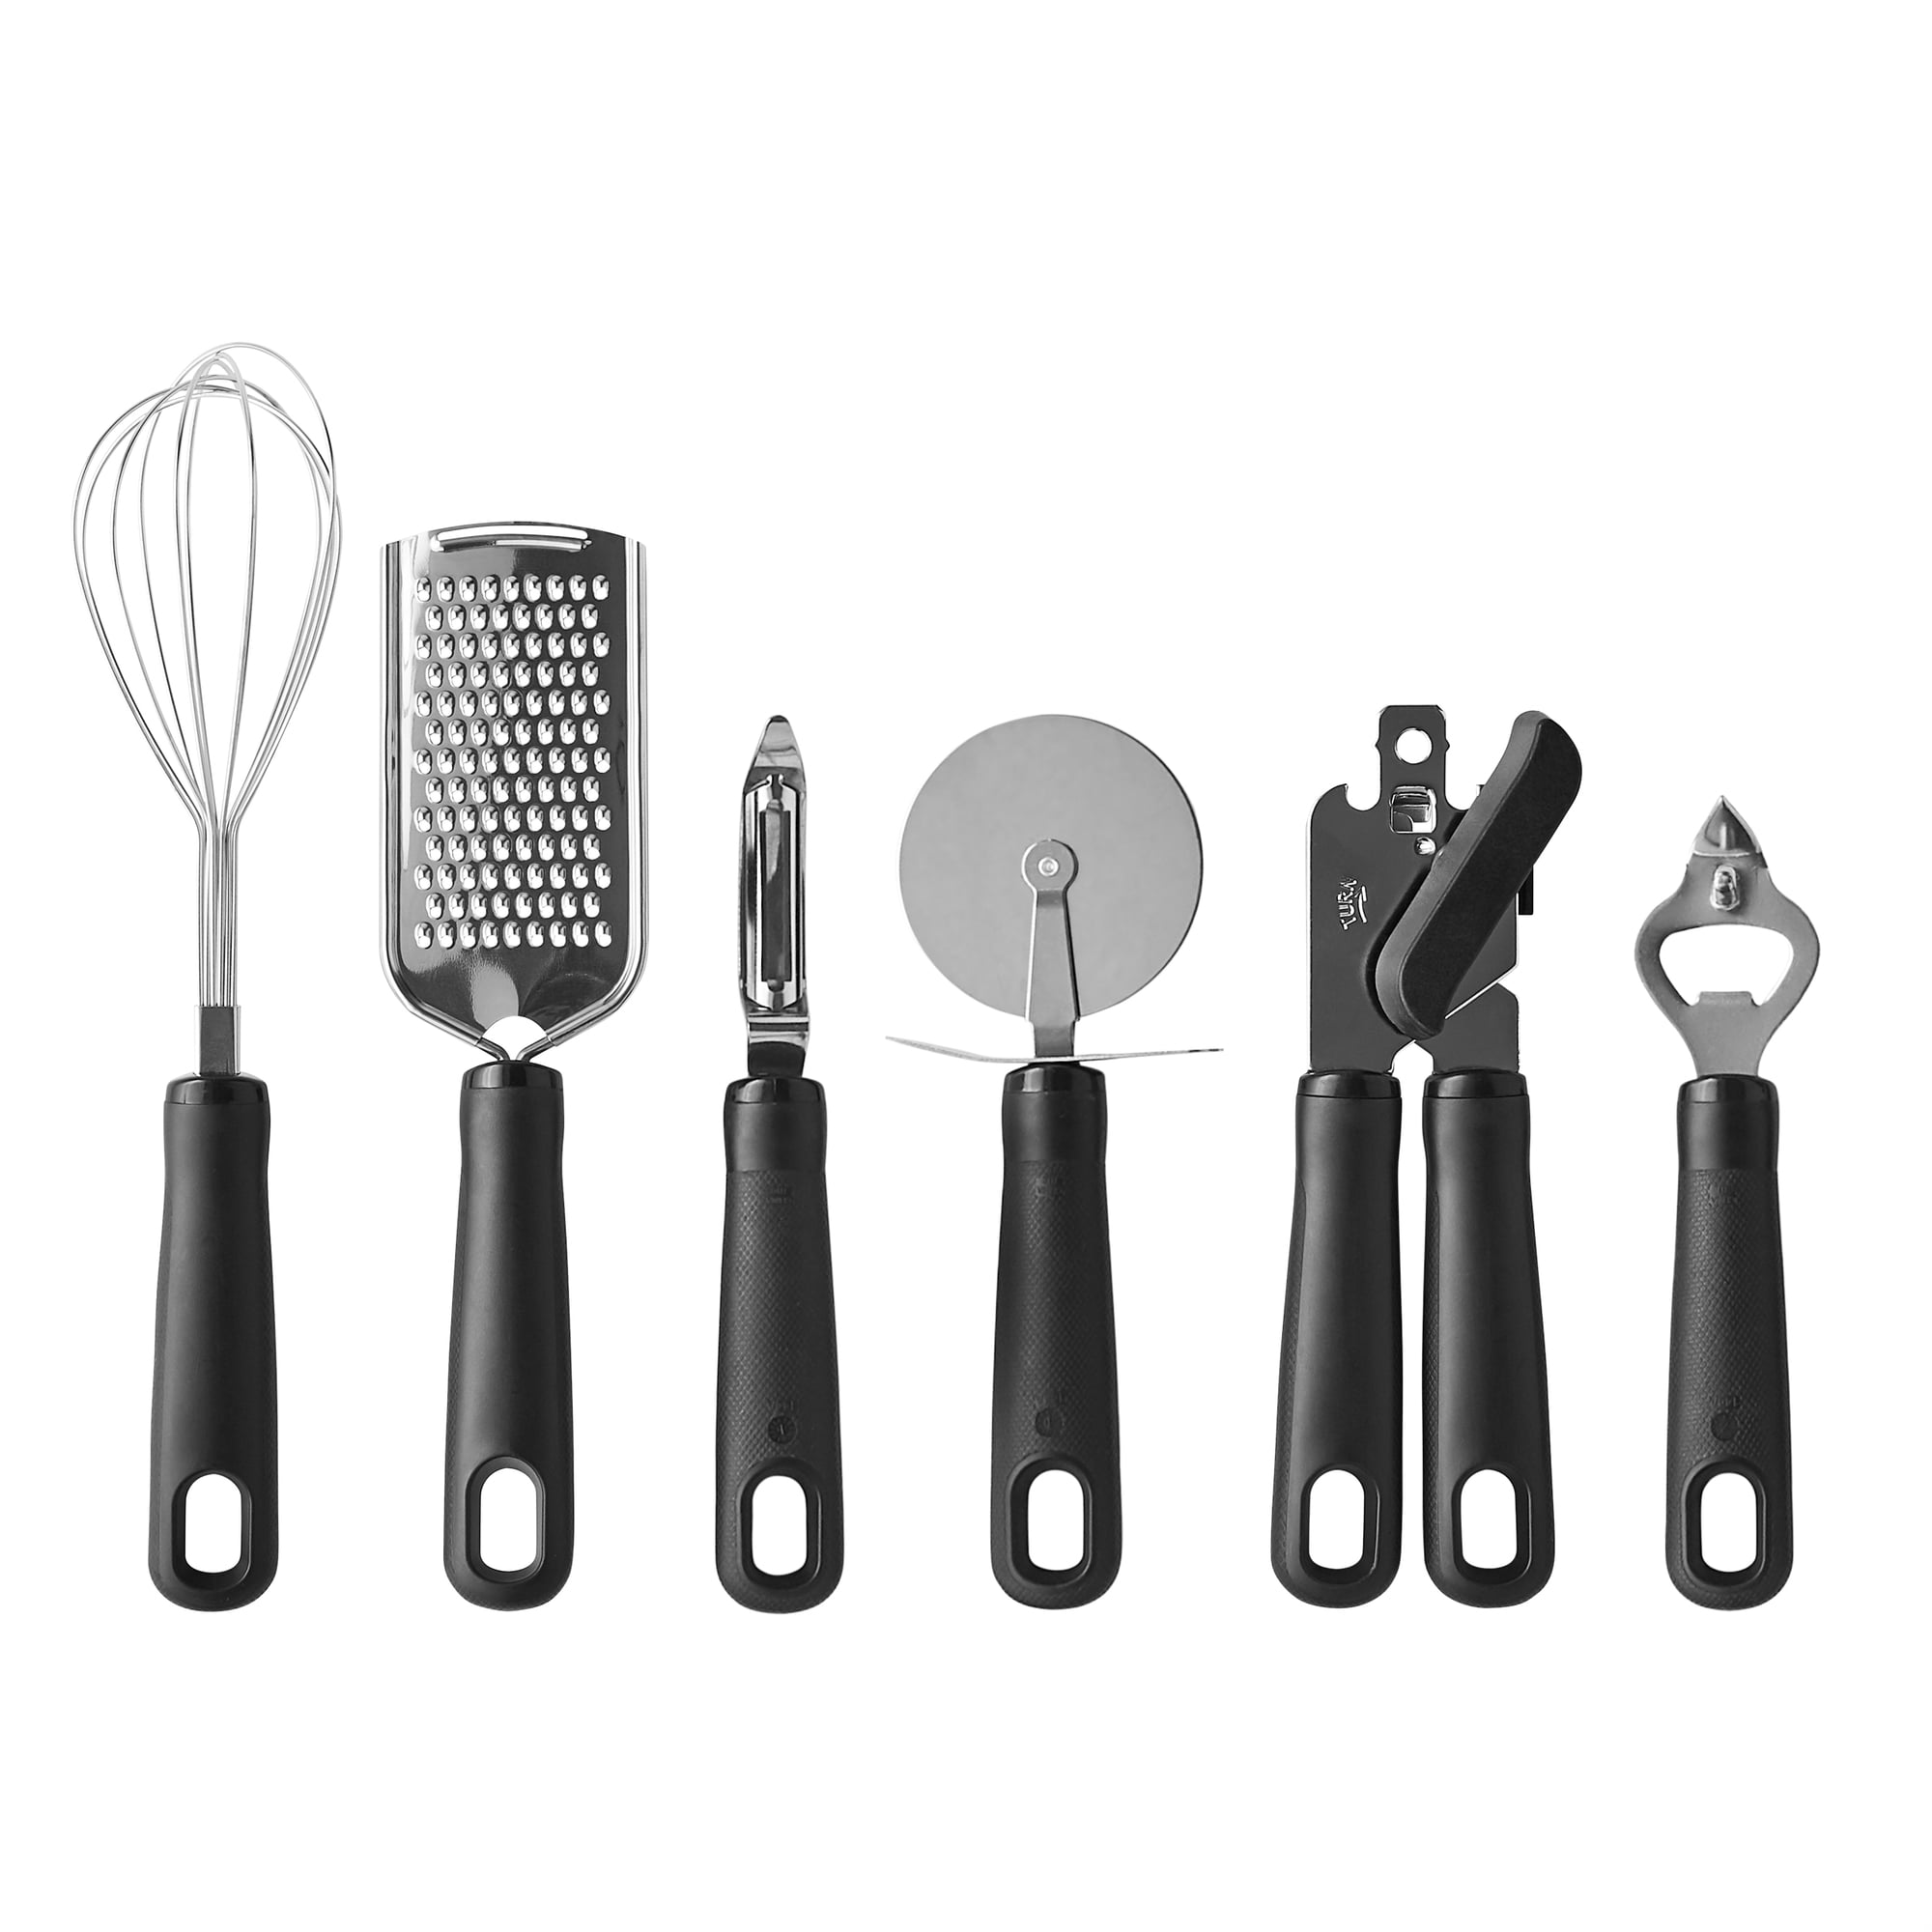 Marte 304 stainless steel kitchen cooking utensils set,6 pcs all metal professional  cooking tools set